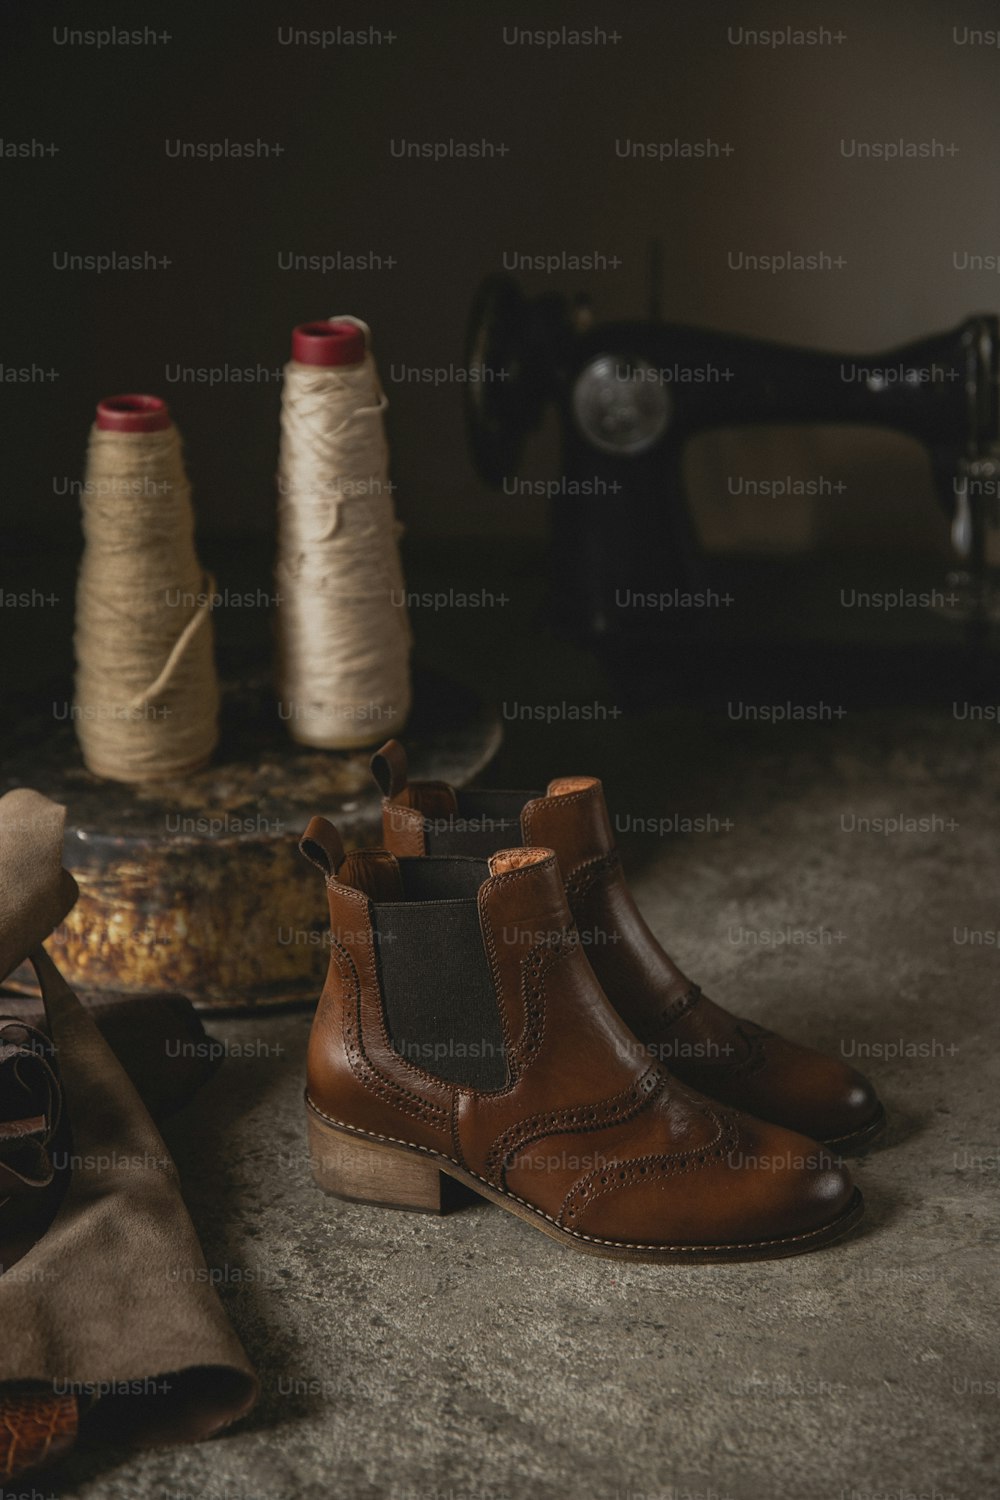 a pair of brown boots sitting next to a spool of thread